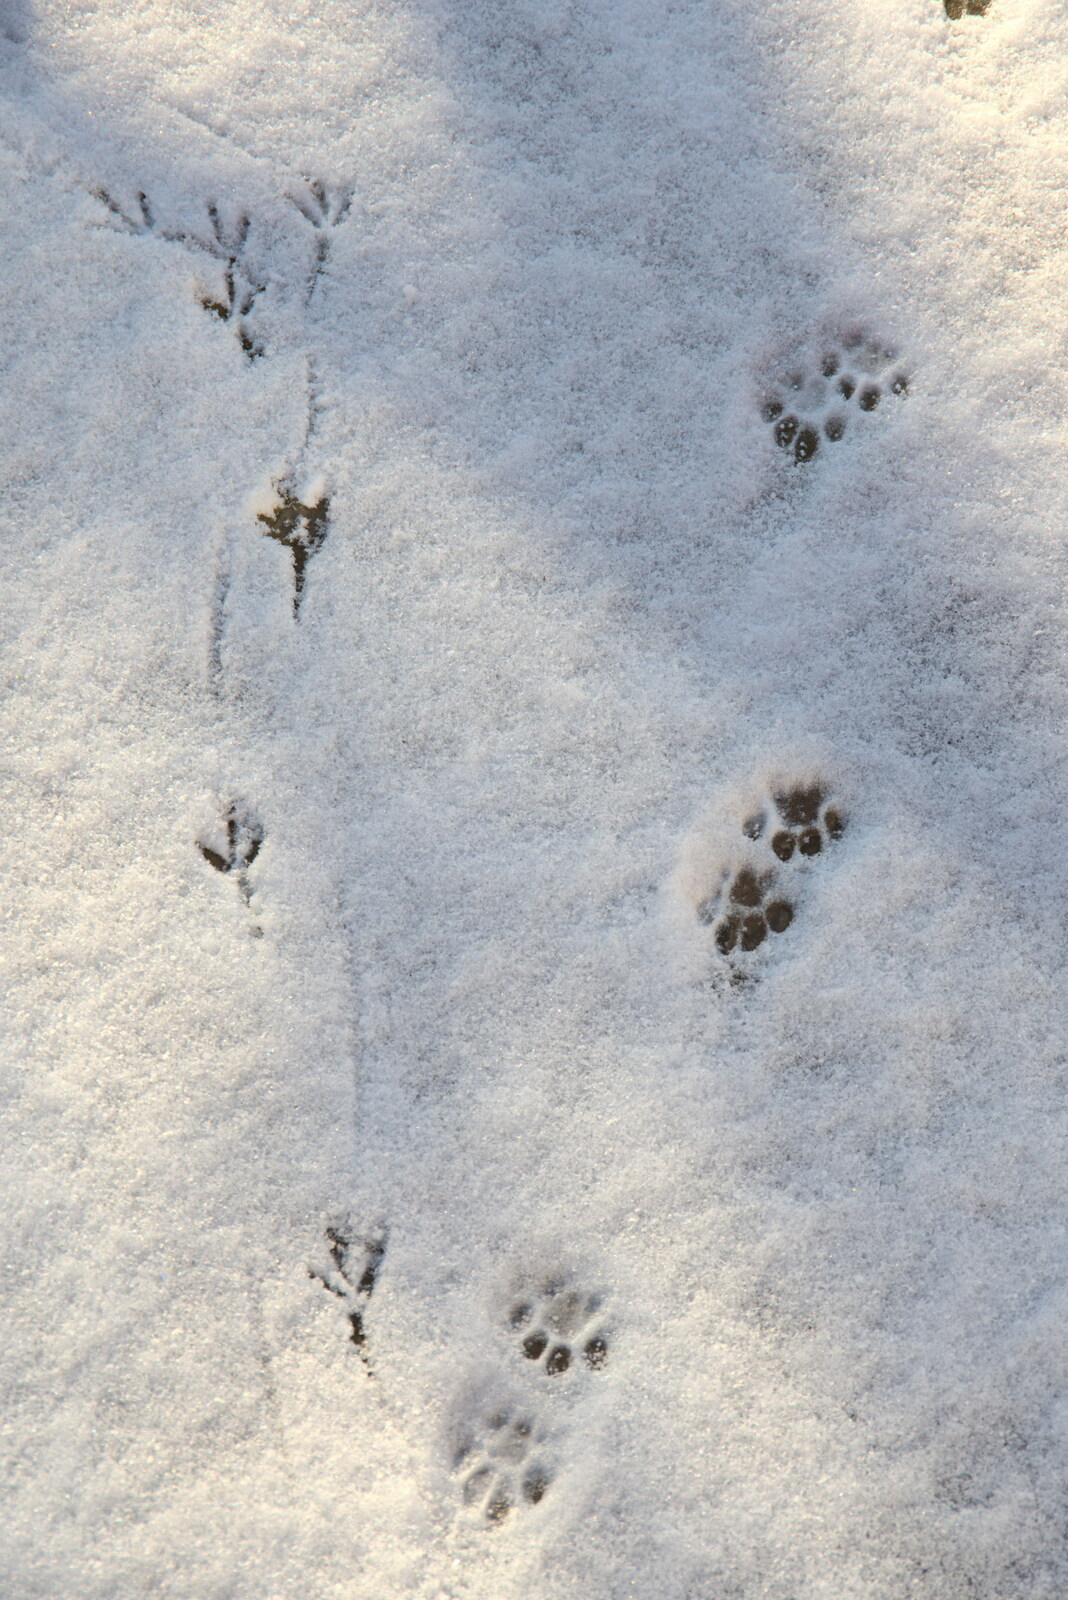 Boris Cat pawprints meet a pheasant in the snow from Derelict Infants School and Ice Sculptures, Diss and Palgrave, Norfolk and Suffolk - 13th February 2021